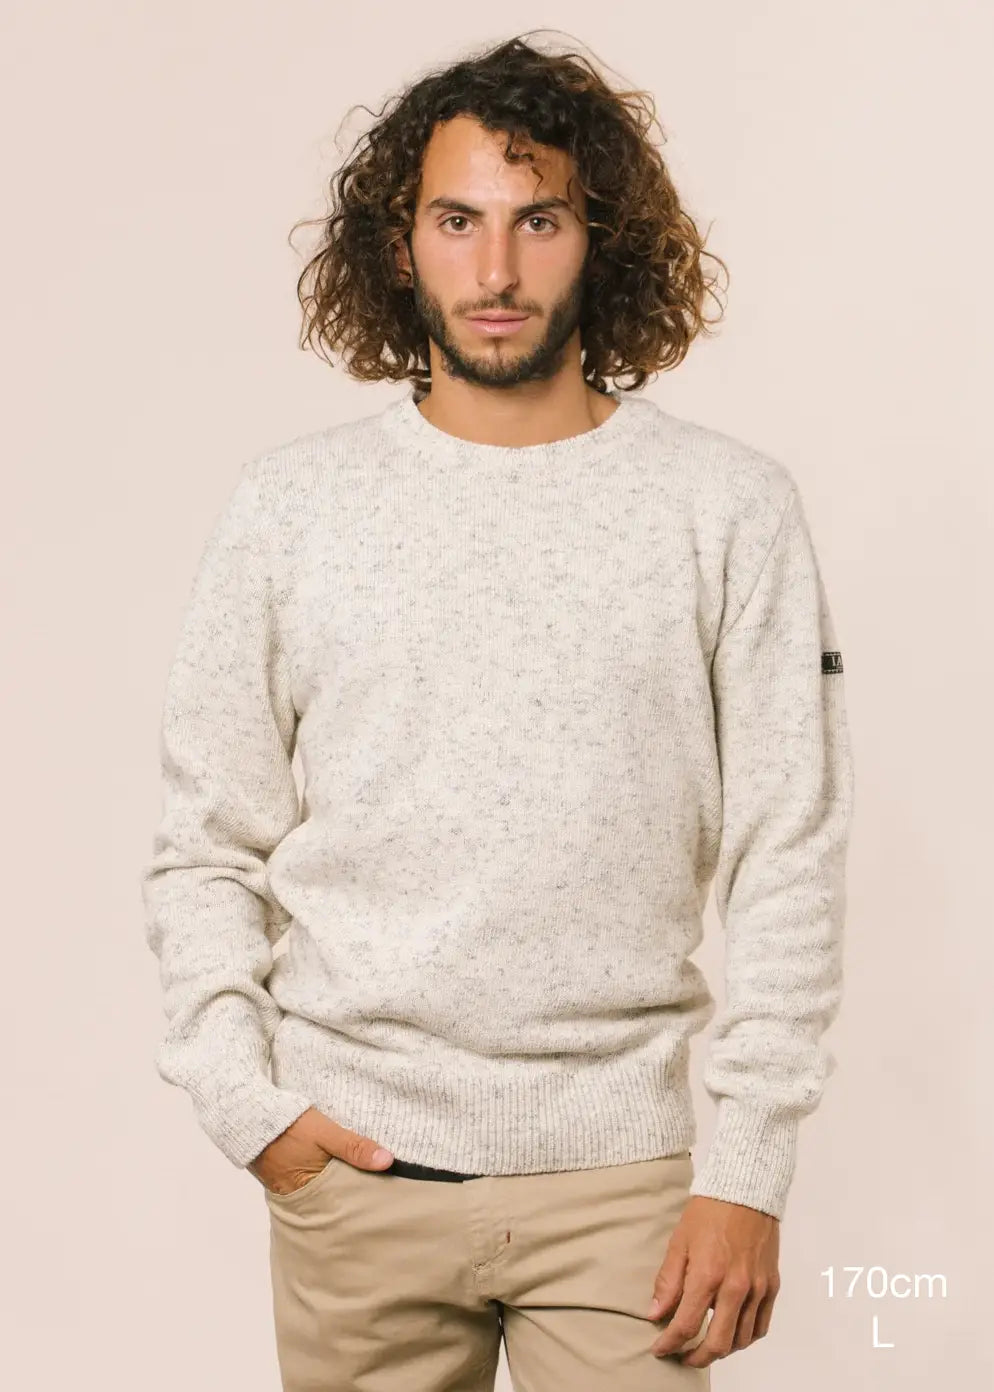 Half-length photograph detailing the height of the model (170cm) and the size of the sweater (L).